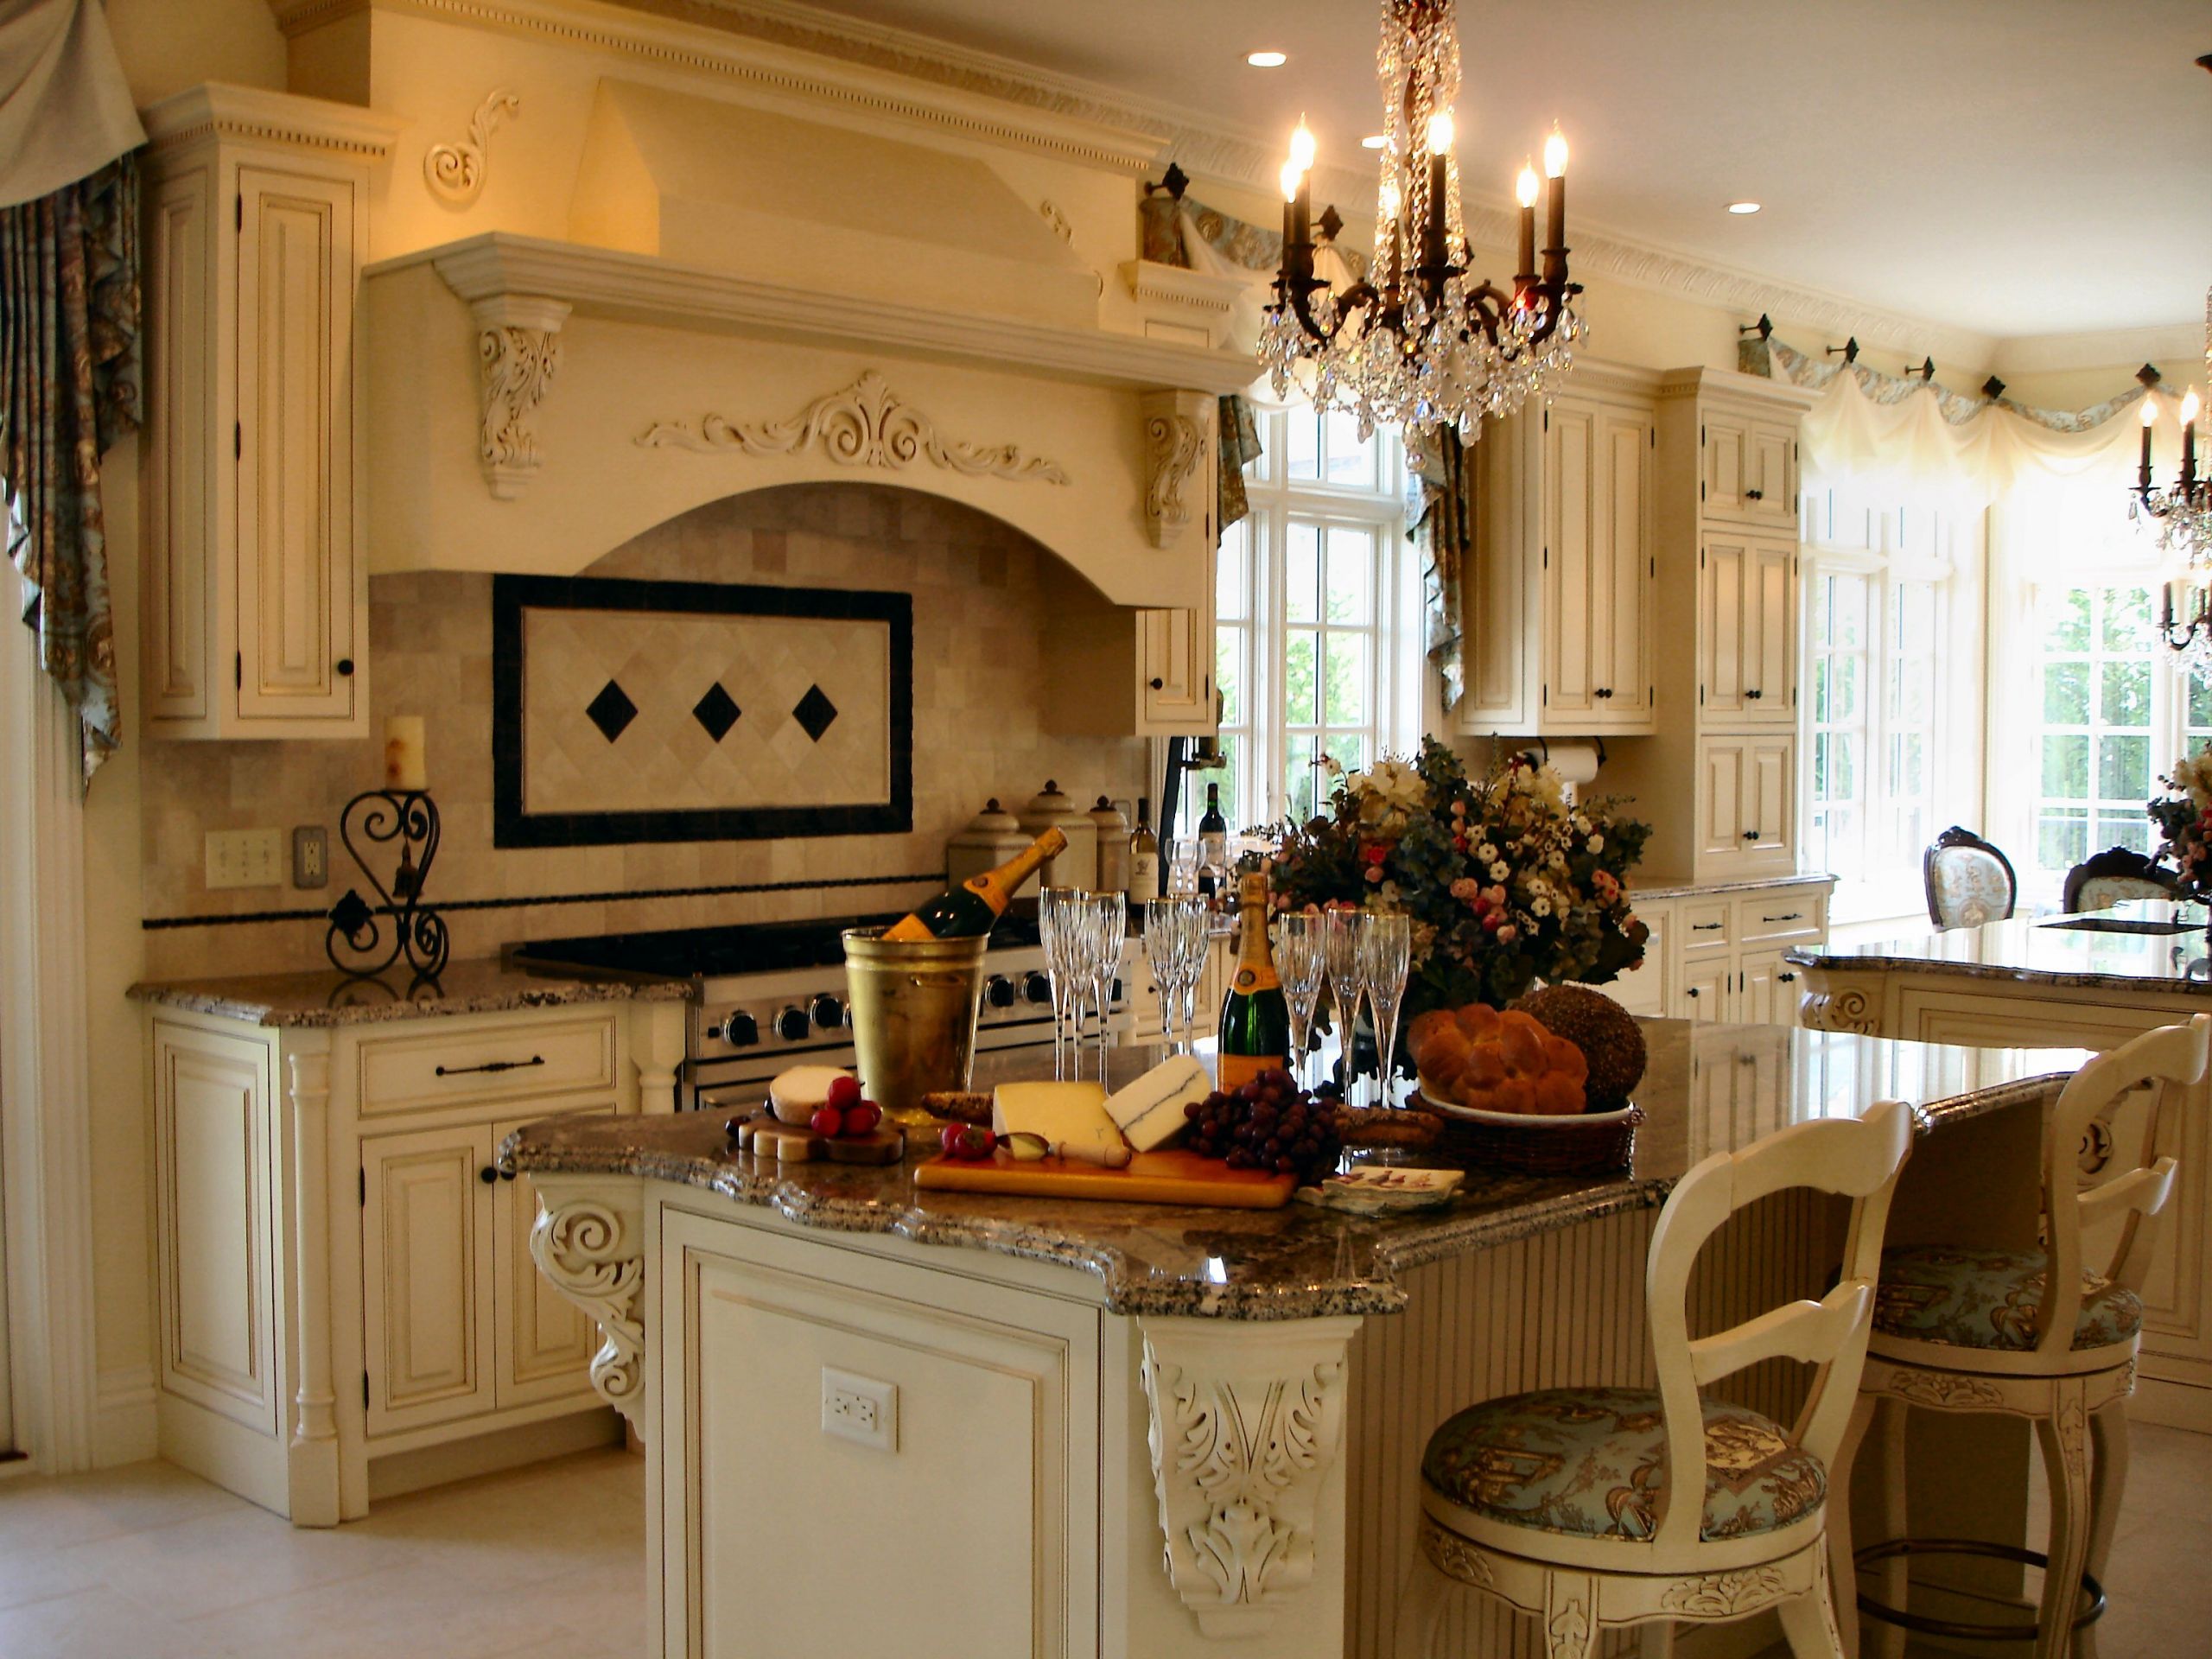 Kitchen Remodel Pics
 Monmouth County Kitchen Remodeling Ideas to Inspire You